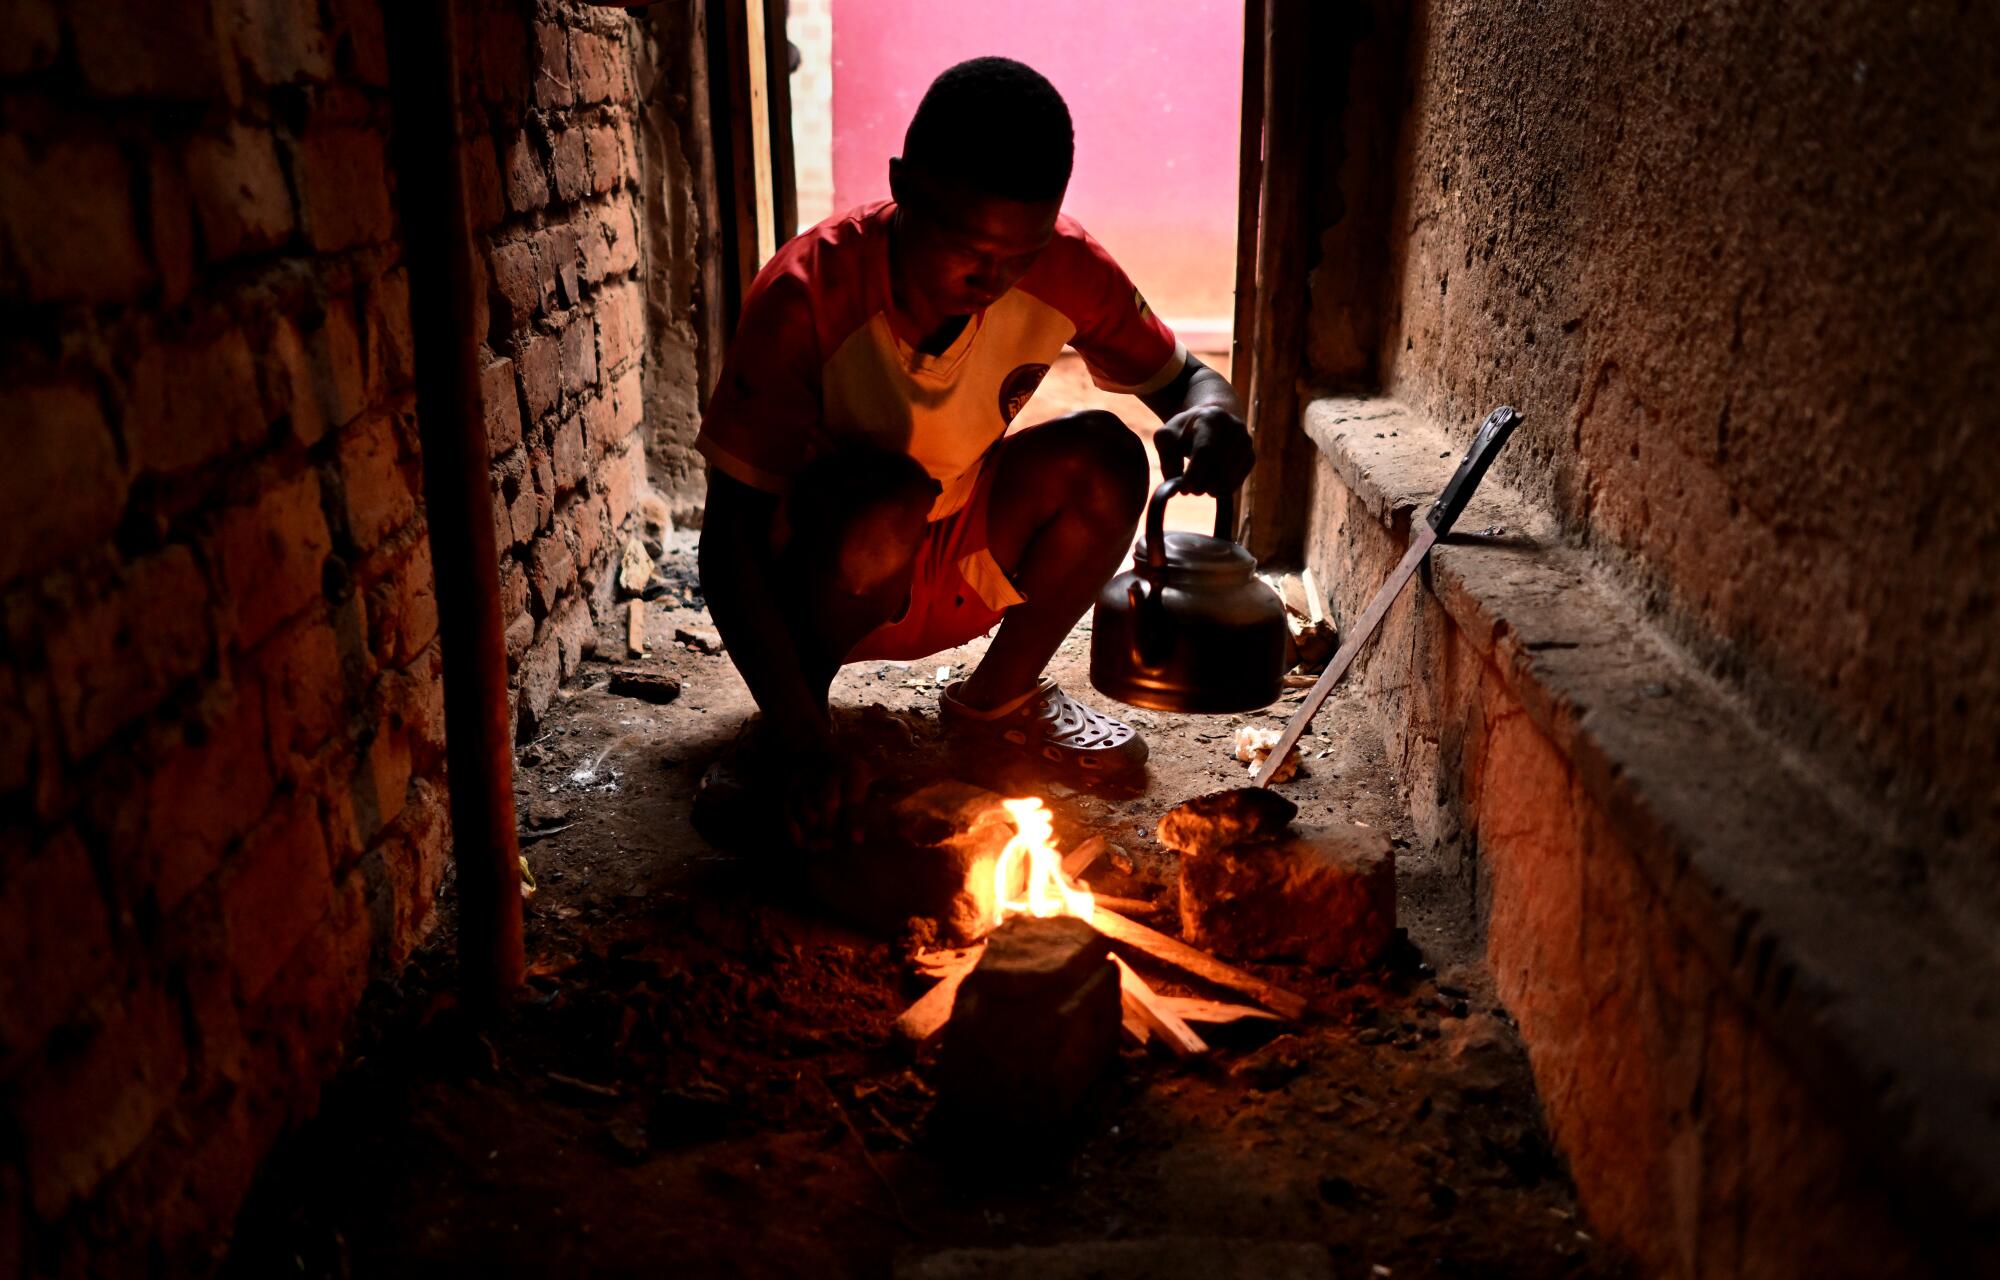 Dennis Kasumba makes a fire to make tea for his grandmother at their home in Uganda.